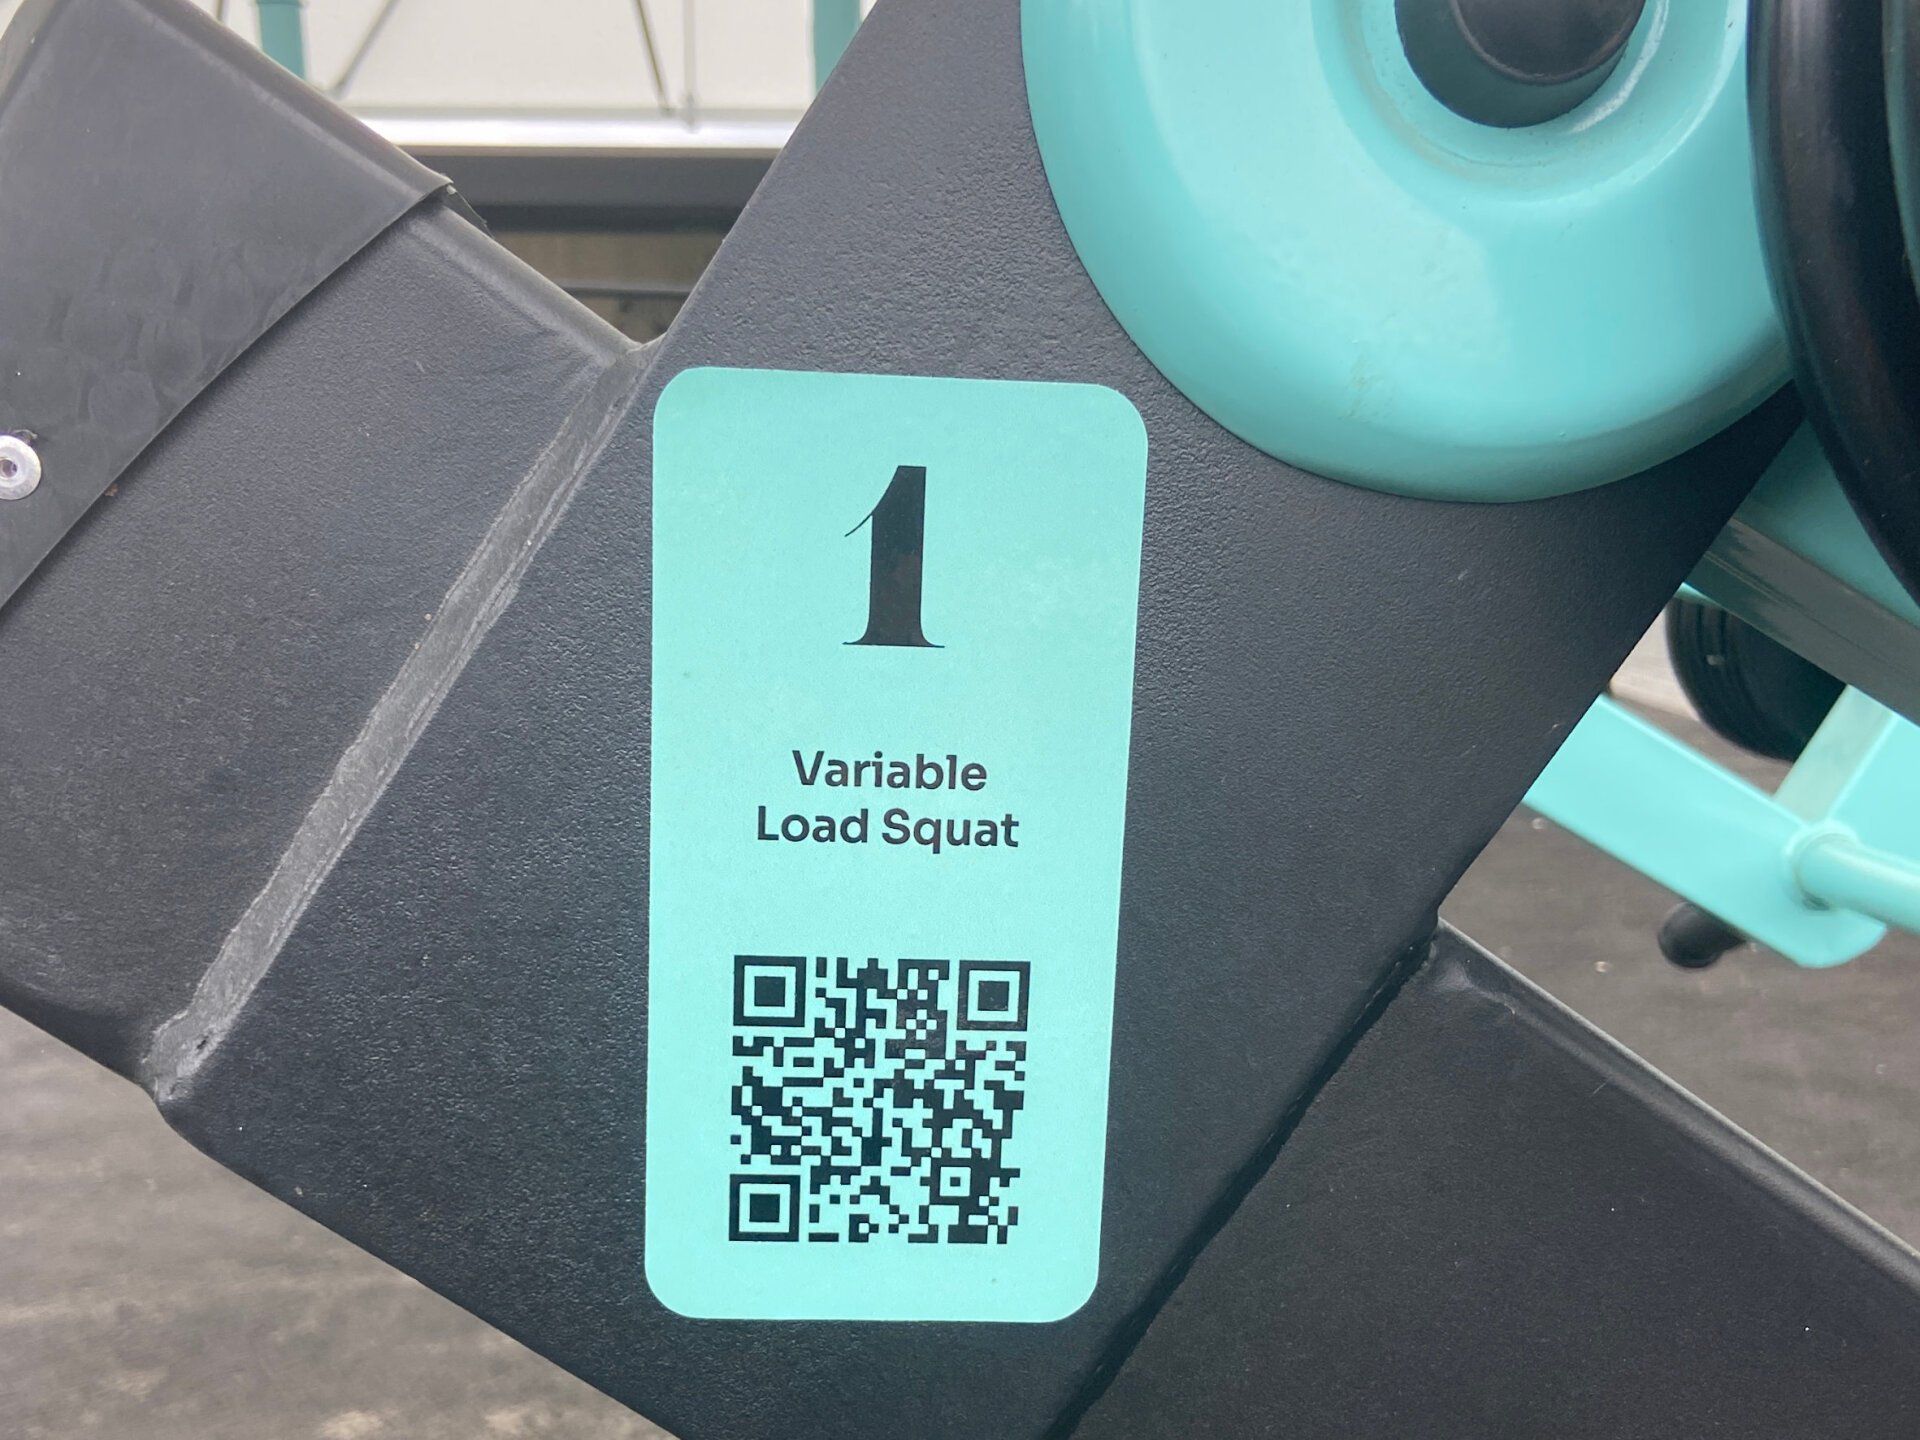 Equipment QR Codes linked to How to Use Video - White Rose Training Park